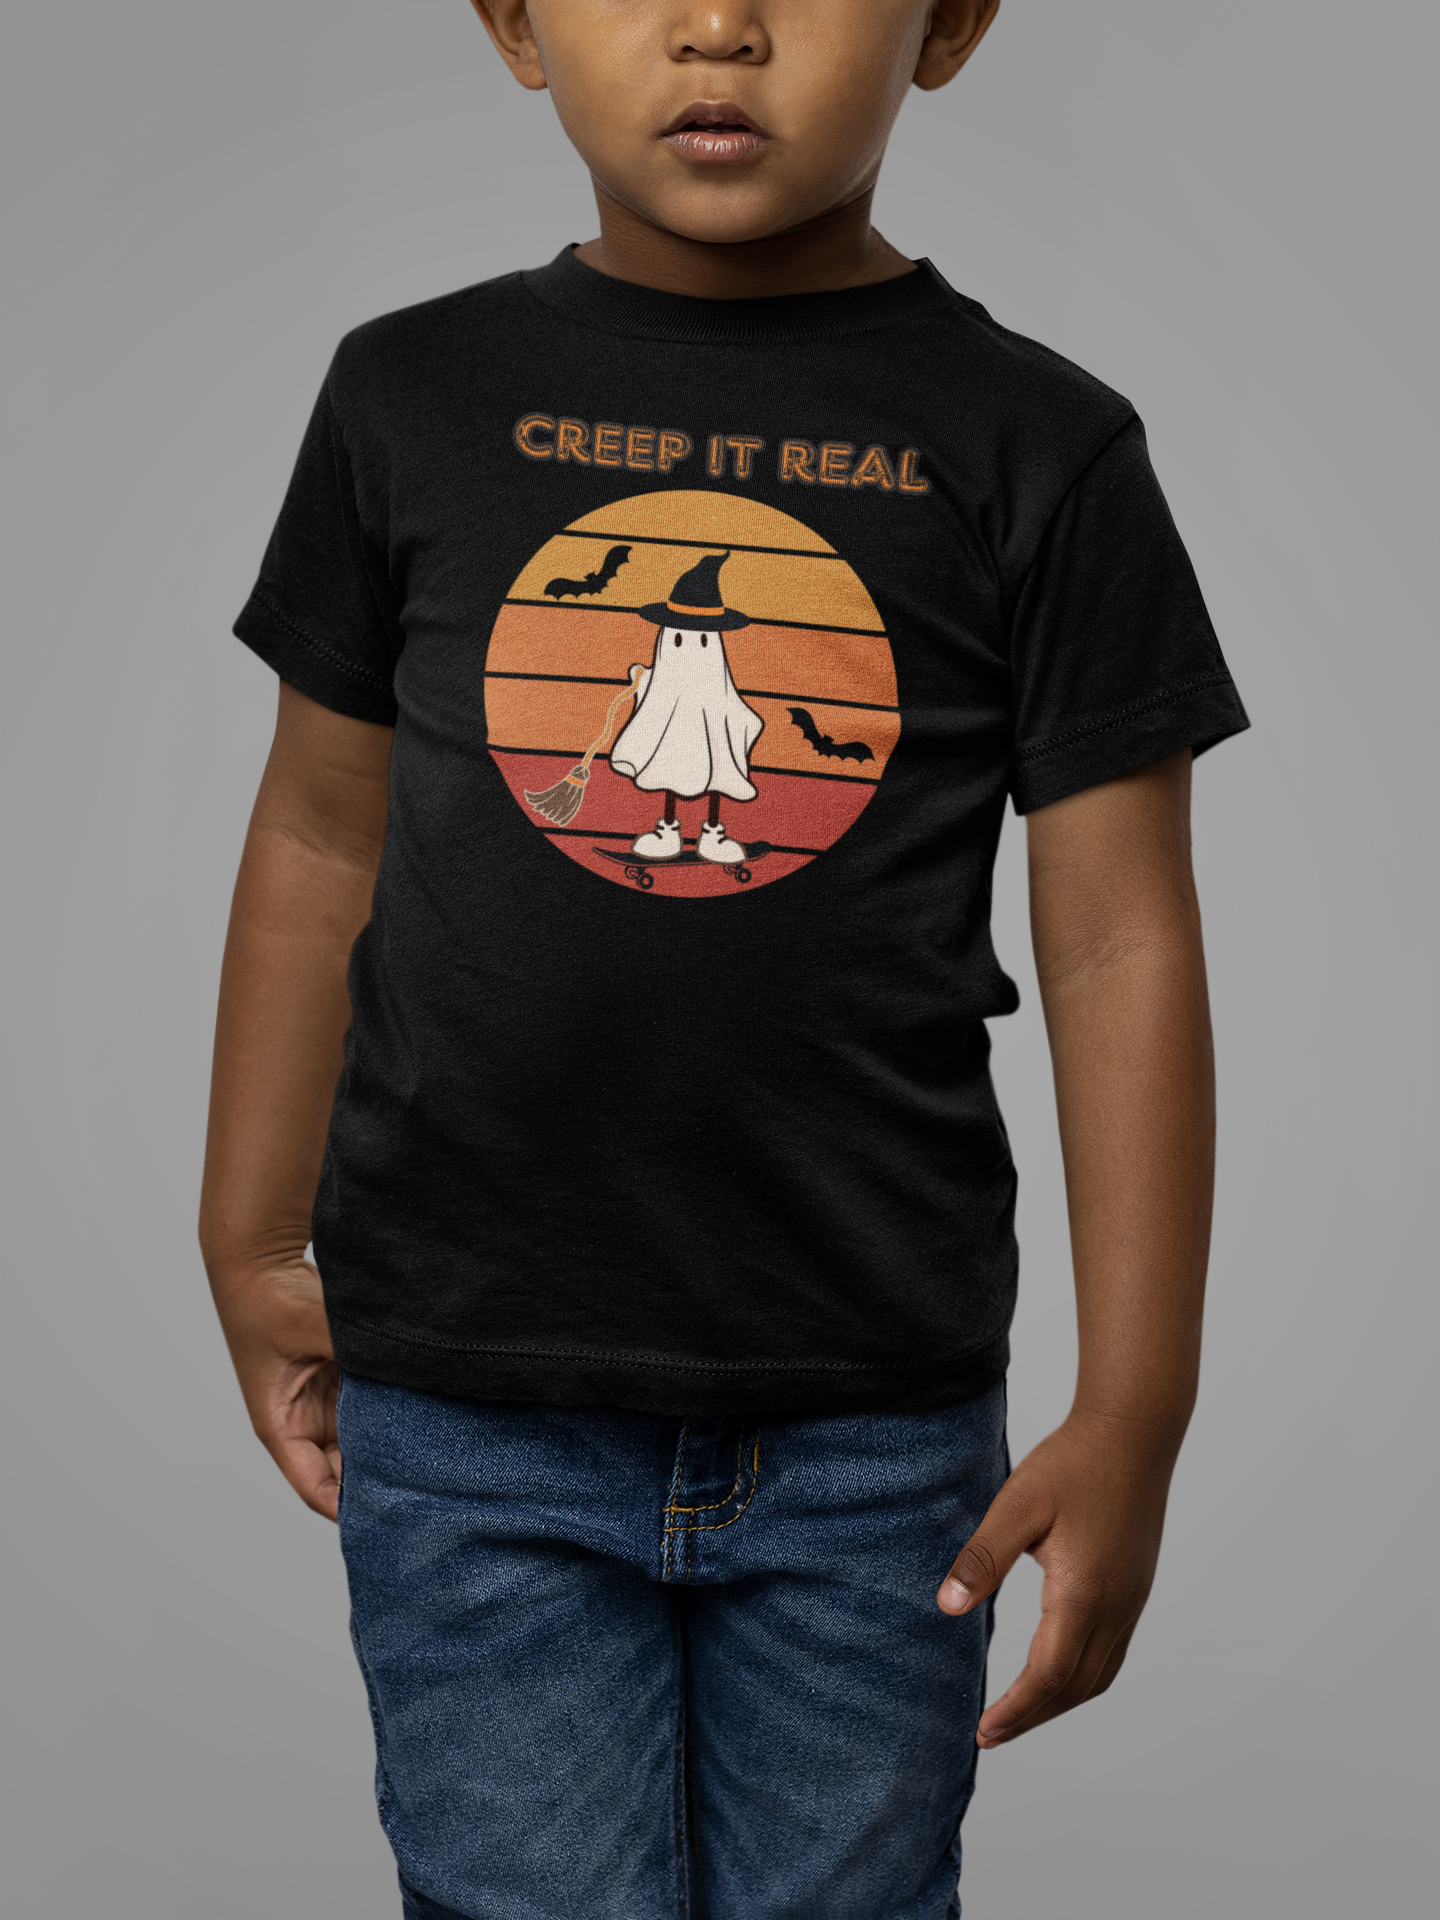 Creep It Real - Unisex Toddler Jersey T-Shirt